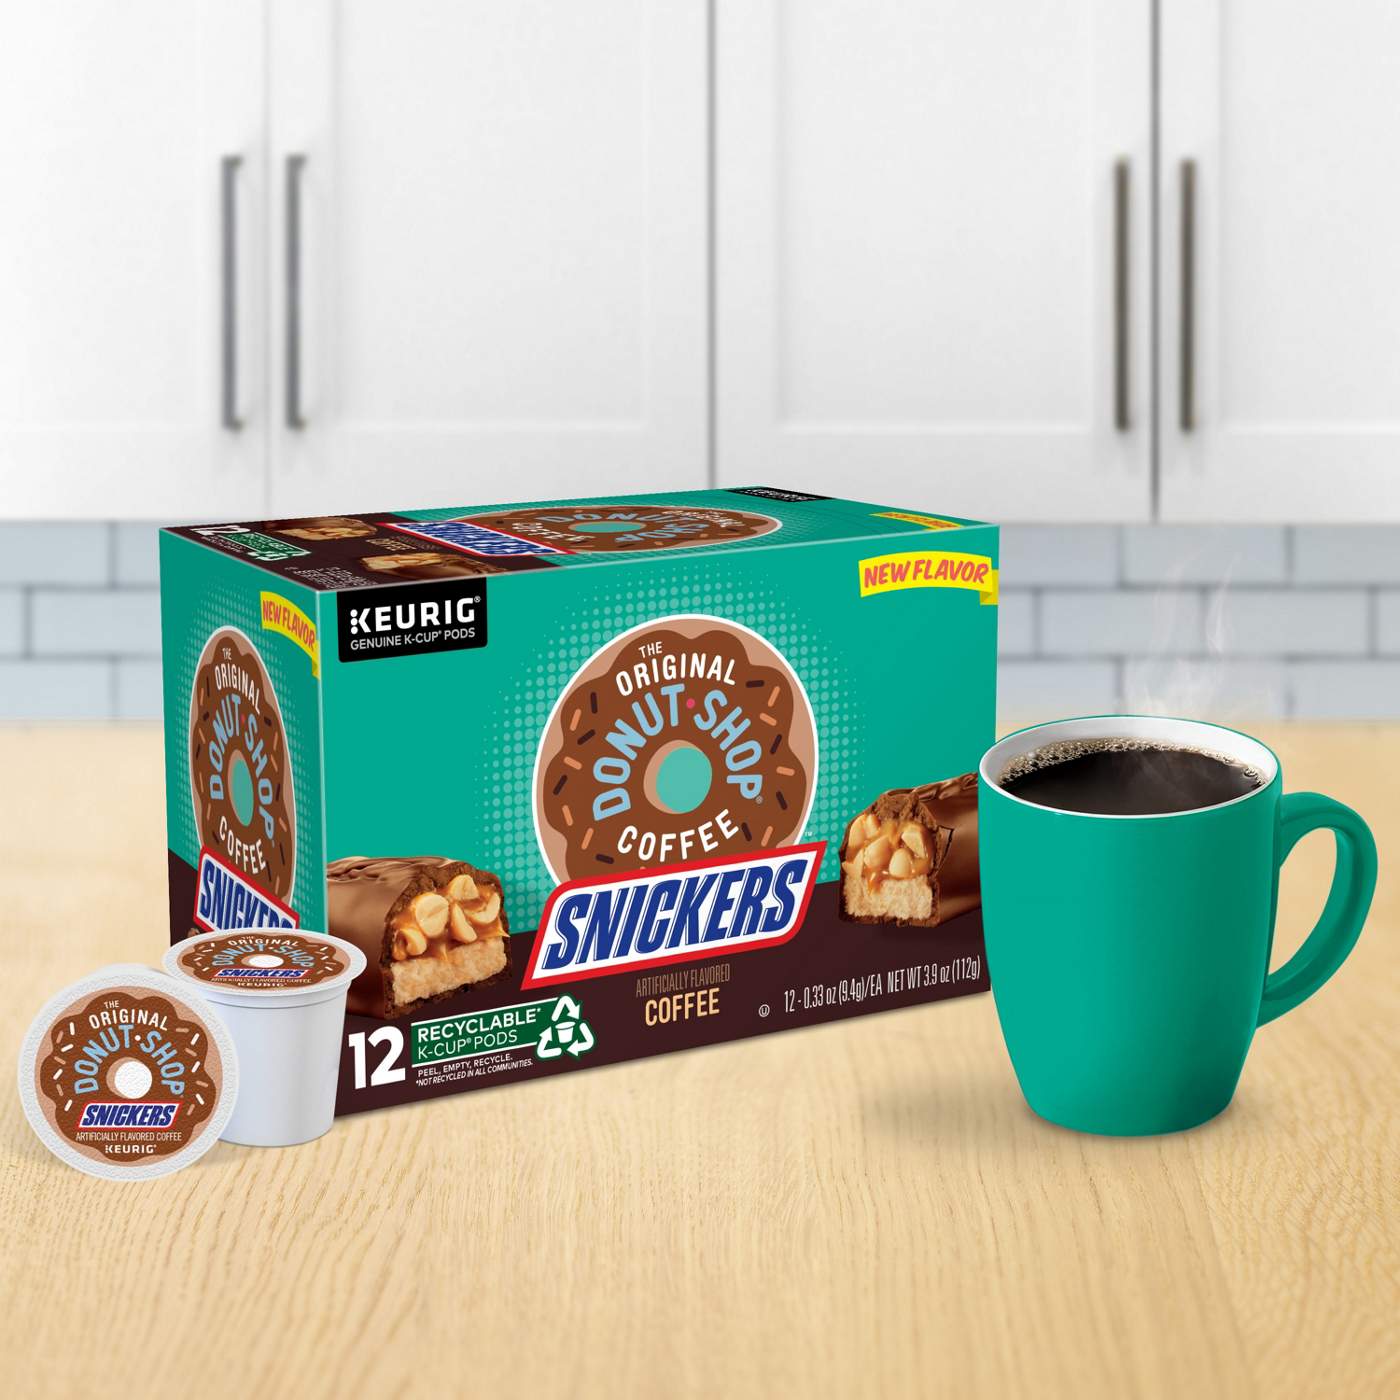 Donut Shop Snickers Single Serve Coffee K Cups; image 2 of 6